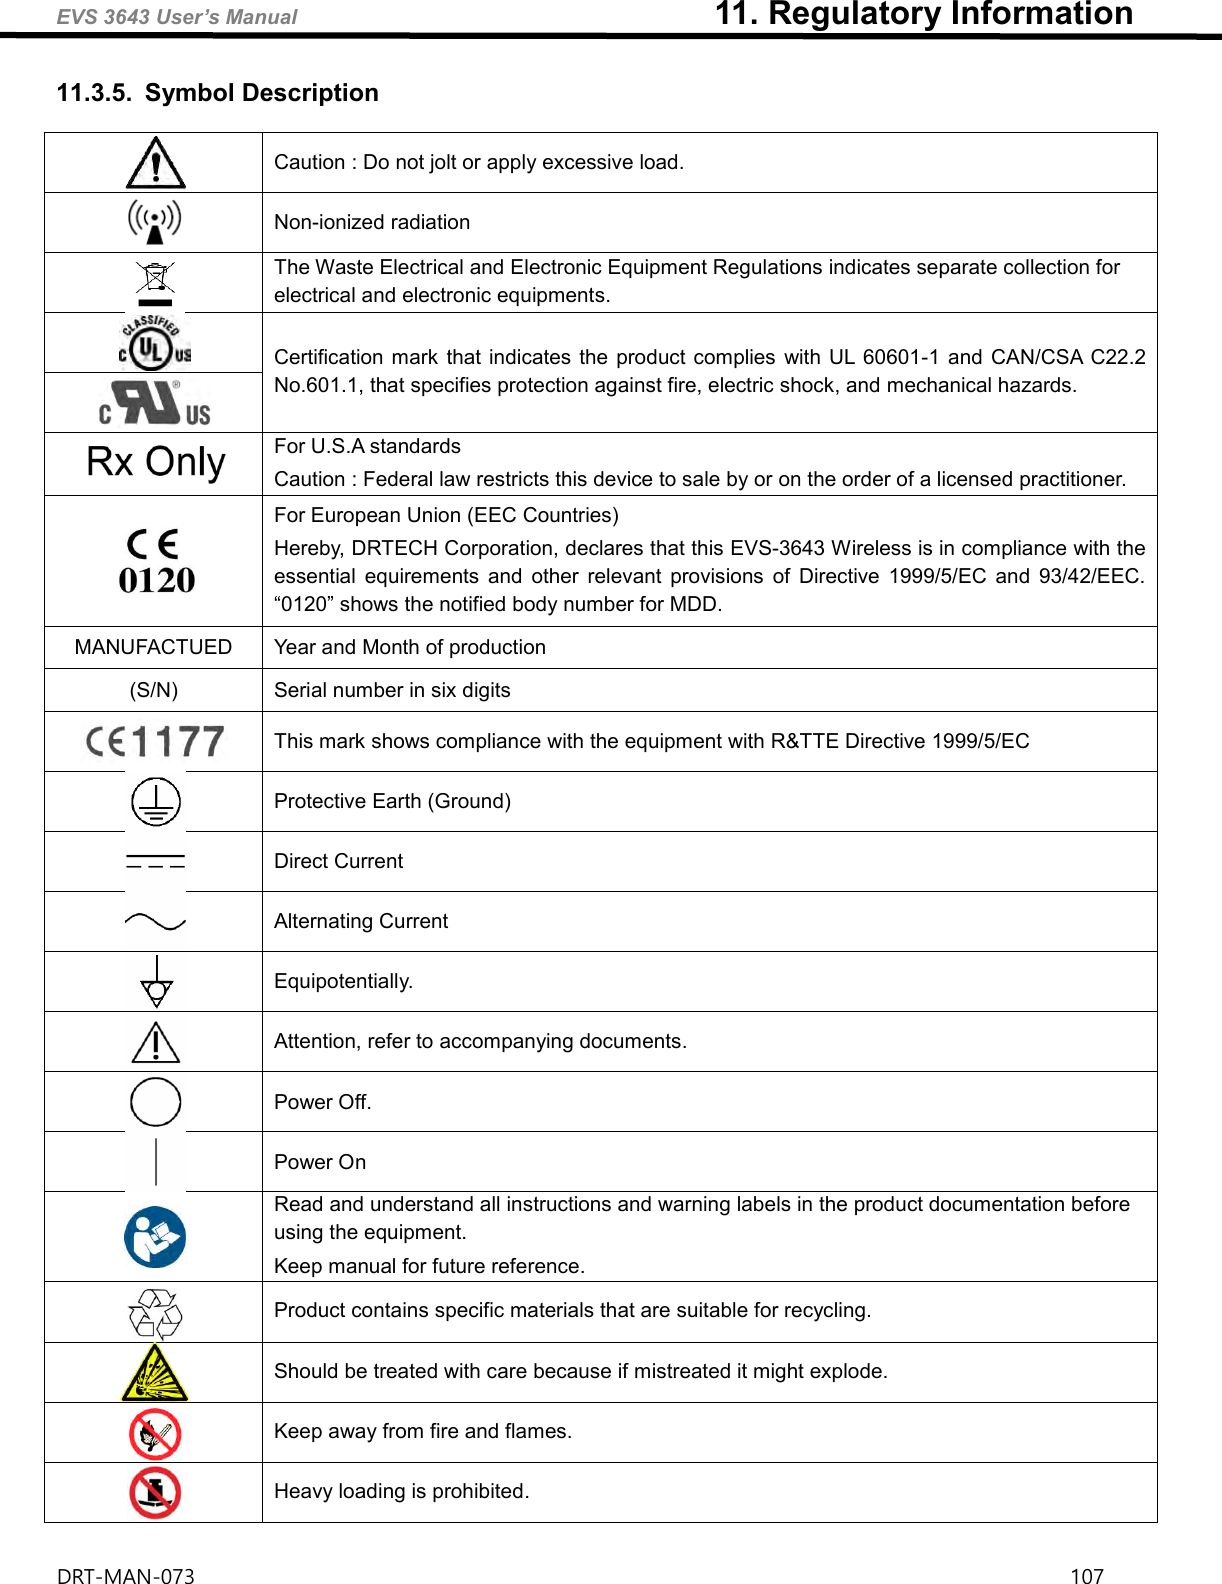 EVS 3643 User’s Manual                                                  11. Regulatory Information DRT-MAN-073                                                                                                                                                                107   11.3.5.  Symbol Description  Caution : Do not jolt or apply excessive load.  Non-ionized radiation  The Waste Electrical and Electronic Equipment Regulations indicates separate collection for electrical and electronic equipments.  Certification mark that indicates the product complies with UL 60601-1 and CAN/CSA C22.2 No.601.1, that specifies protection against fire, electric shock, and mechanical hazards.   For U.S.A standards Caution : Federal law restricts this device to sale by or on the order of a licensed practitioner.  For European Union (EEC Countries) Hereby, DRTECH Corporation, declares that this EVS-3643 Wireless is in compliance with the essential  equirements  and  other  relevant  provisions  of  Directive  1999/5/EC and  93/42/EEC. “0120” shows the notified body number for MDD. MANUFACTUED Year and Month of production (S/N) Serial number in six digits  This mark shows compliance with the equipment with R&amp;TTE Directive 1999/5/EC    Protective Earth (Ground)  Direct Current  Alternating Current  Equipotentially.  Attention, refer to accompanying documents.  Power Off.  Power On  Read and understand all instructions and warning labels in the product documentation before using the equipment.   Keep manual for future reference.  Product contains specific materials that are suitable for recycling.  Should be treated with care because if mistreated it might explode.  Keep away from fire and flames.  Heavy loading is prohibited.    